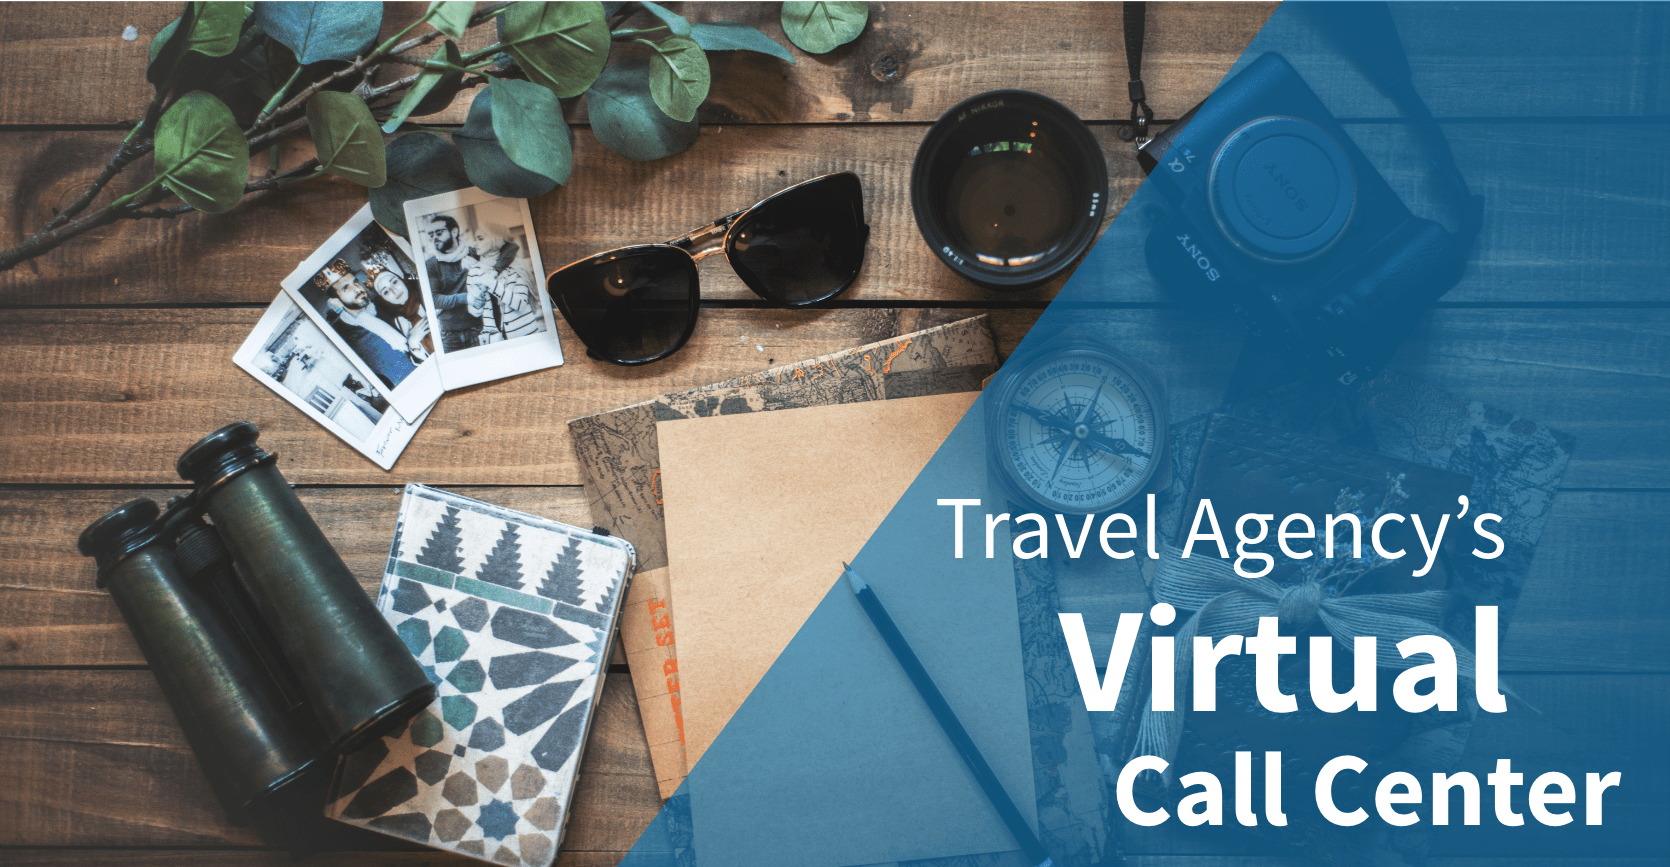 Travel Agency Takes Flight with Virtual Call Center Banner